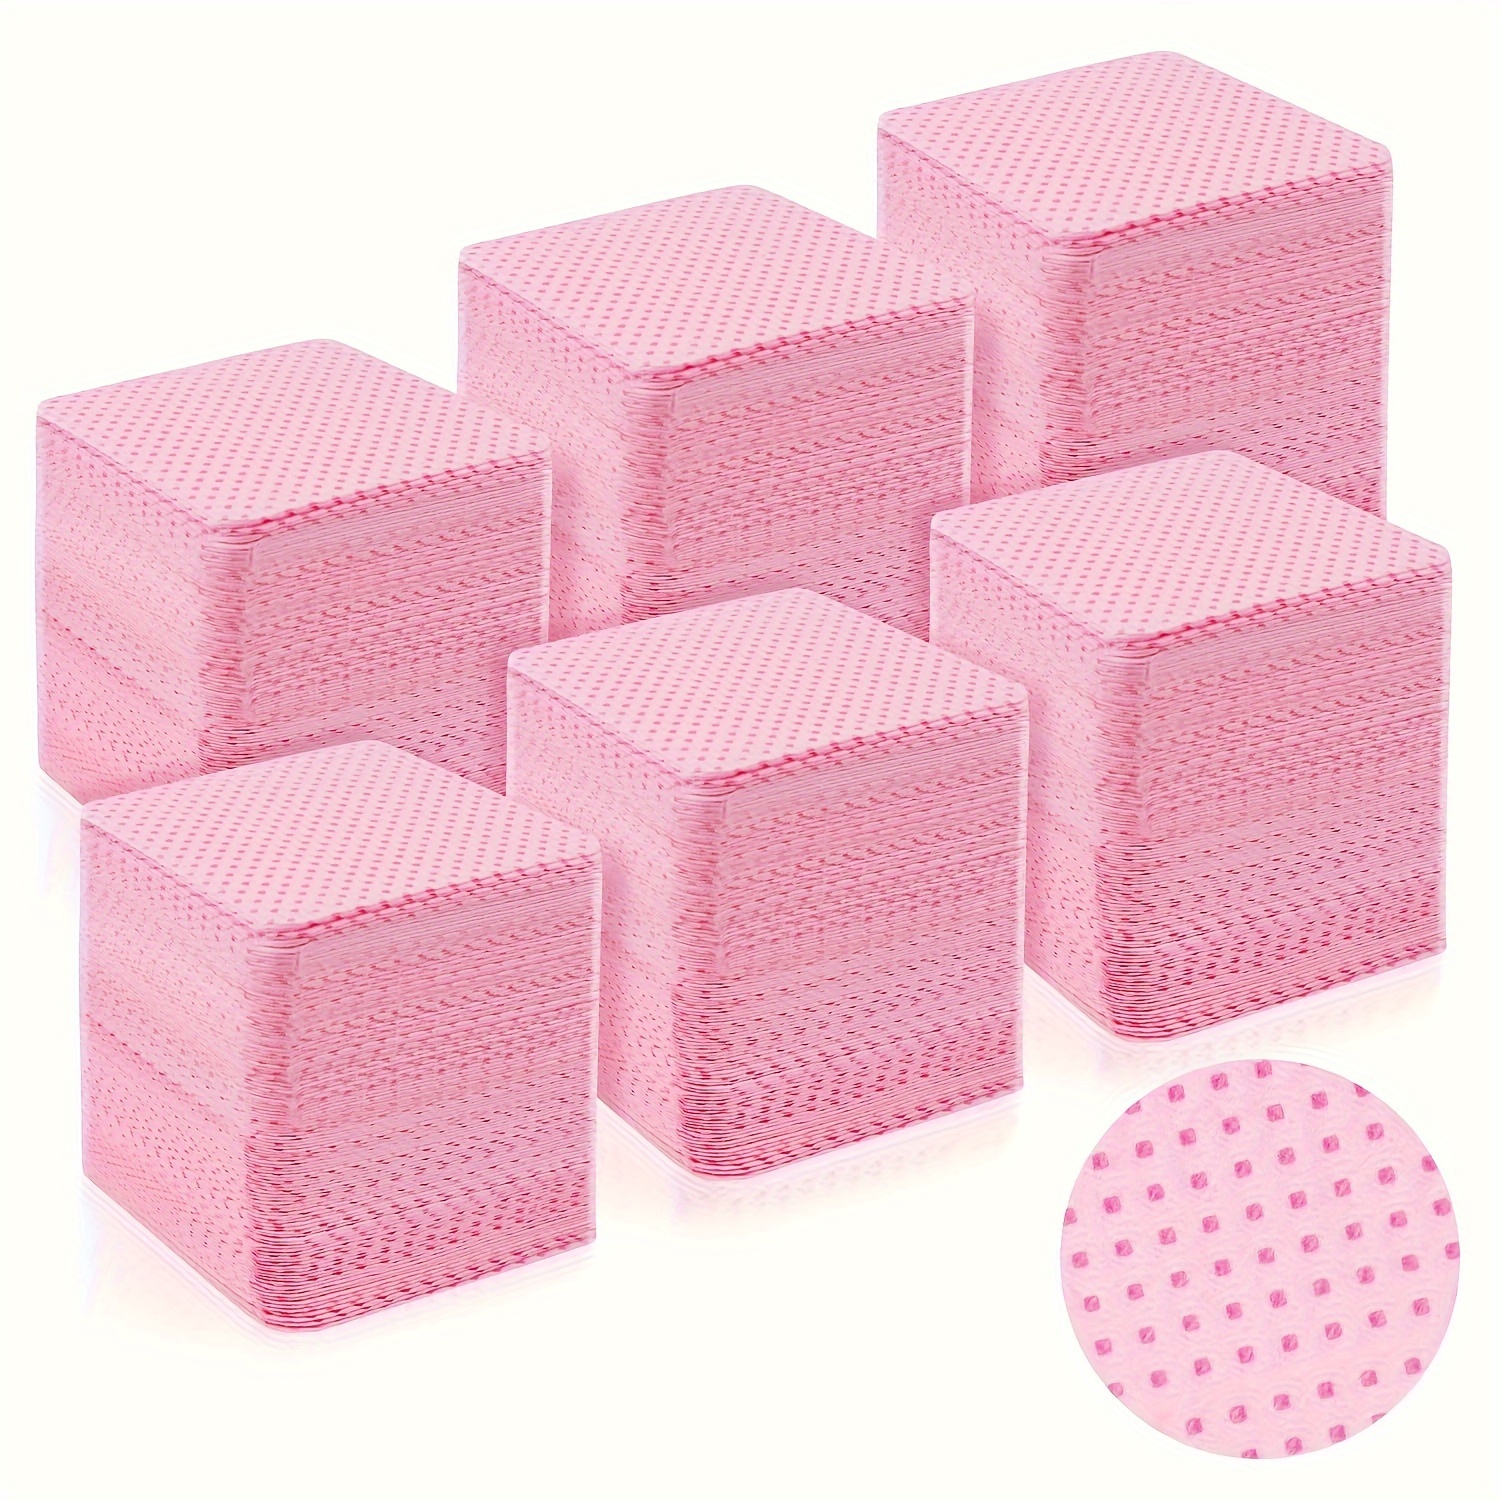 

300/600pcs Nail Wipes, Nail Polish Remover Pads, Soft Nail Cleaning Wipes, Manicure Tool